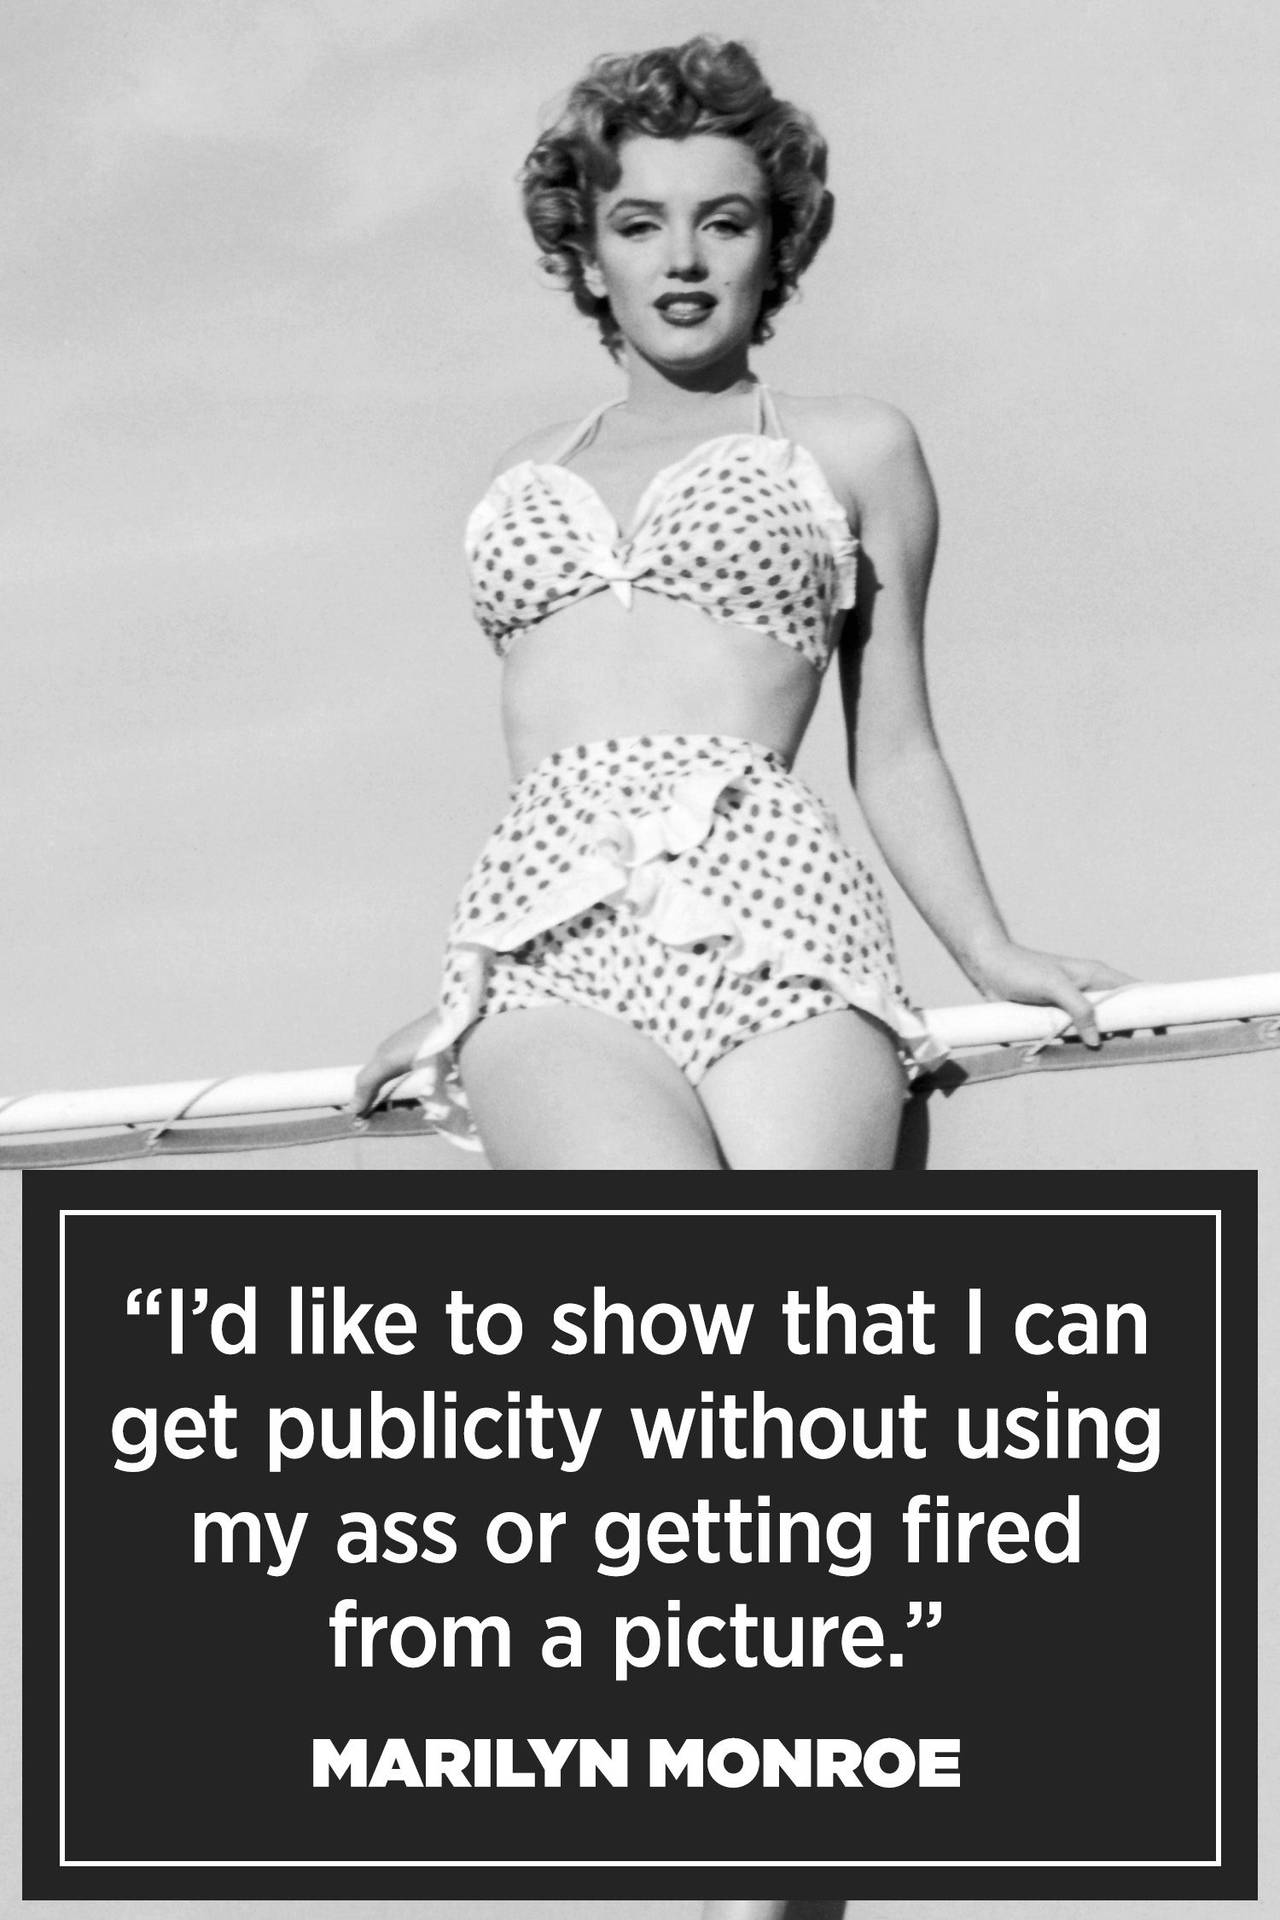 Publicity Marilyn Monroe Quotes Background